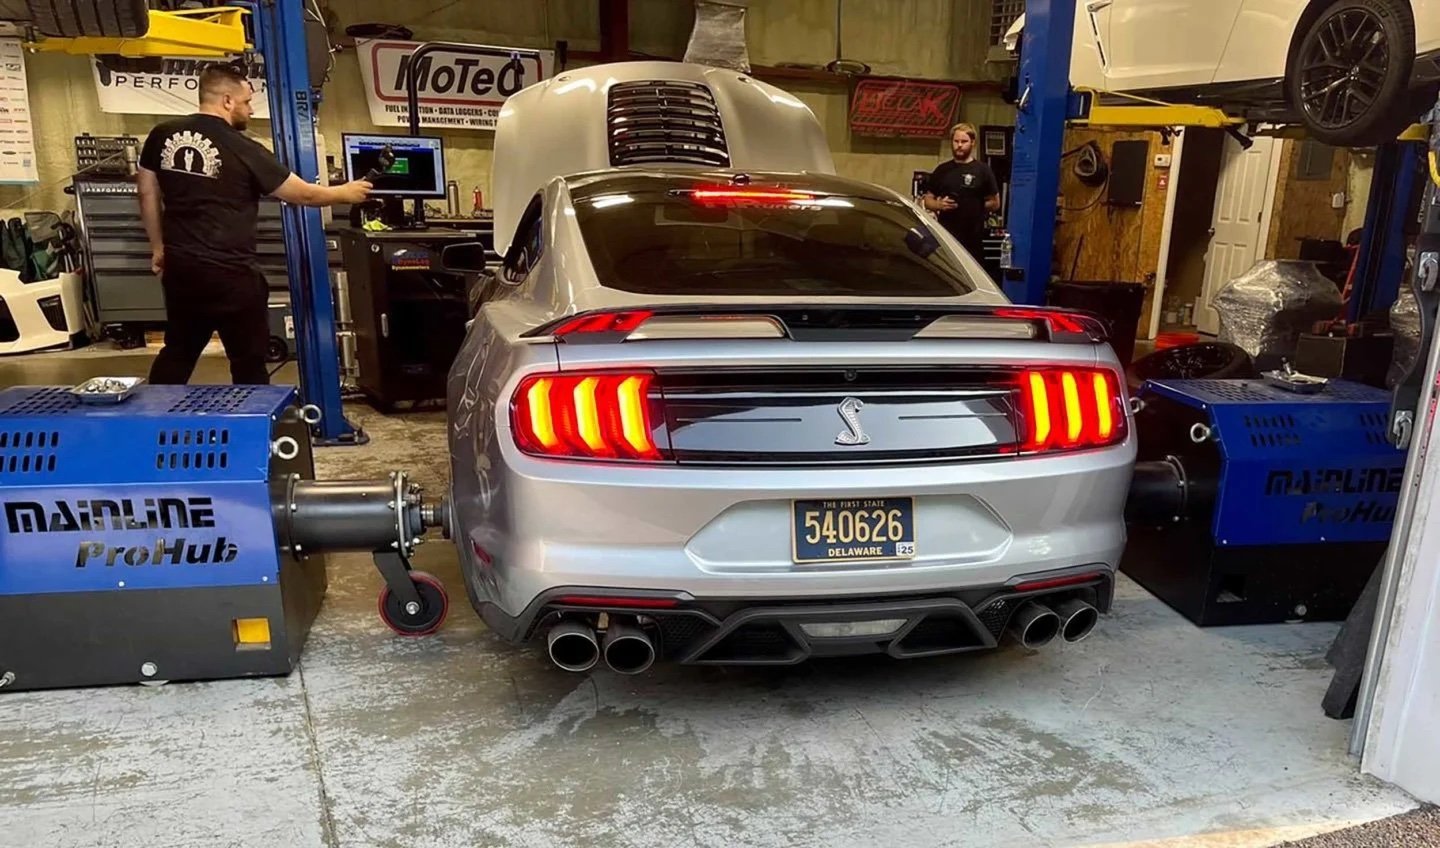 Top 7 Things To Check Before Hitting The Dyno